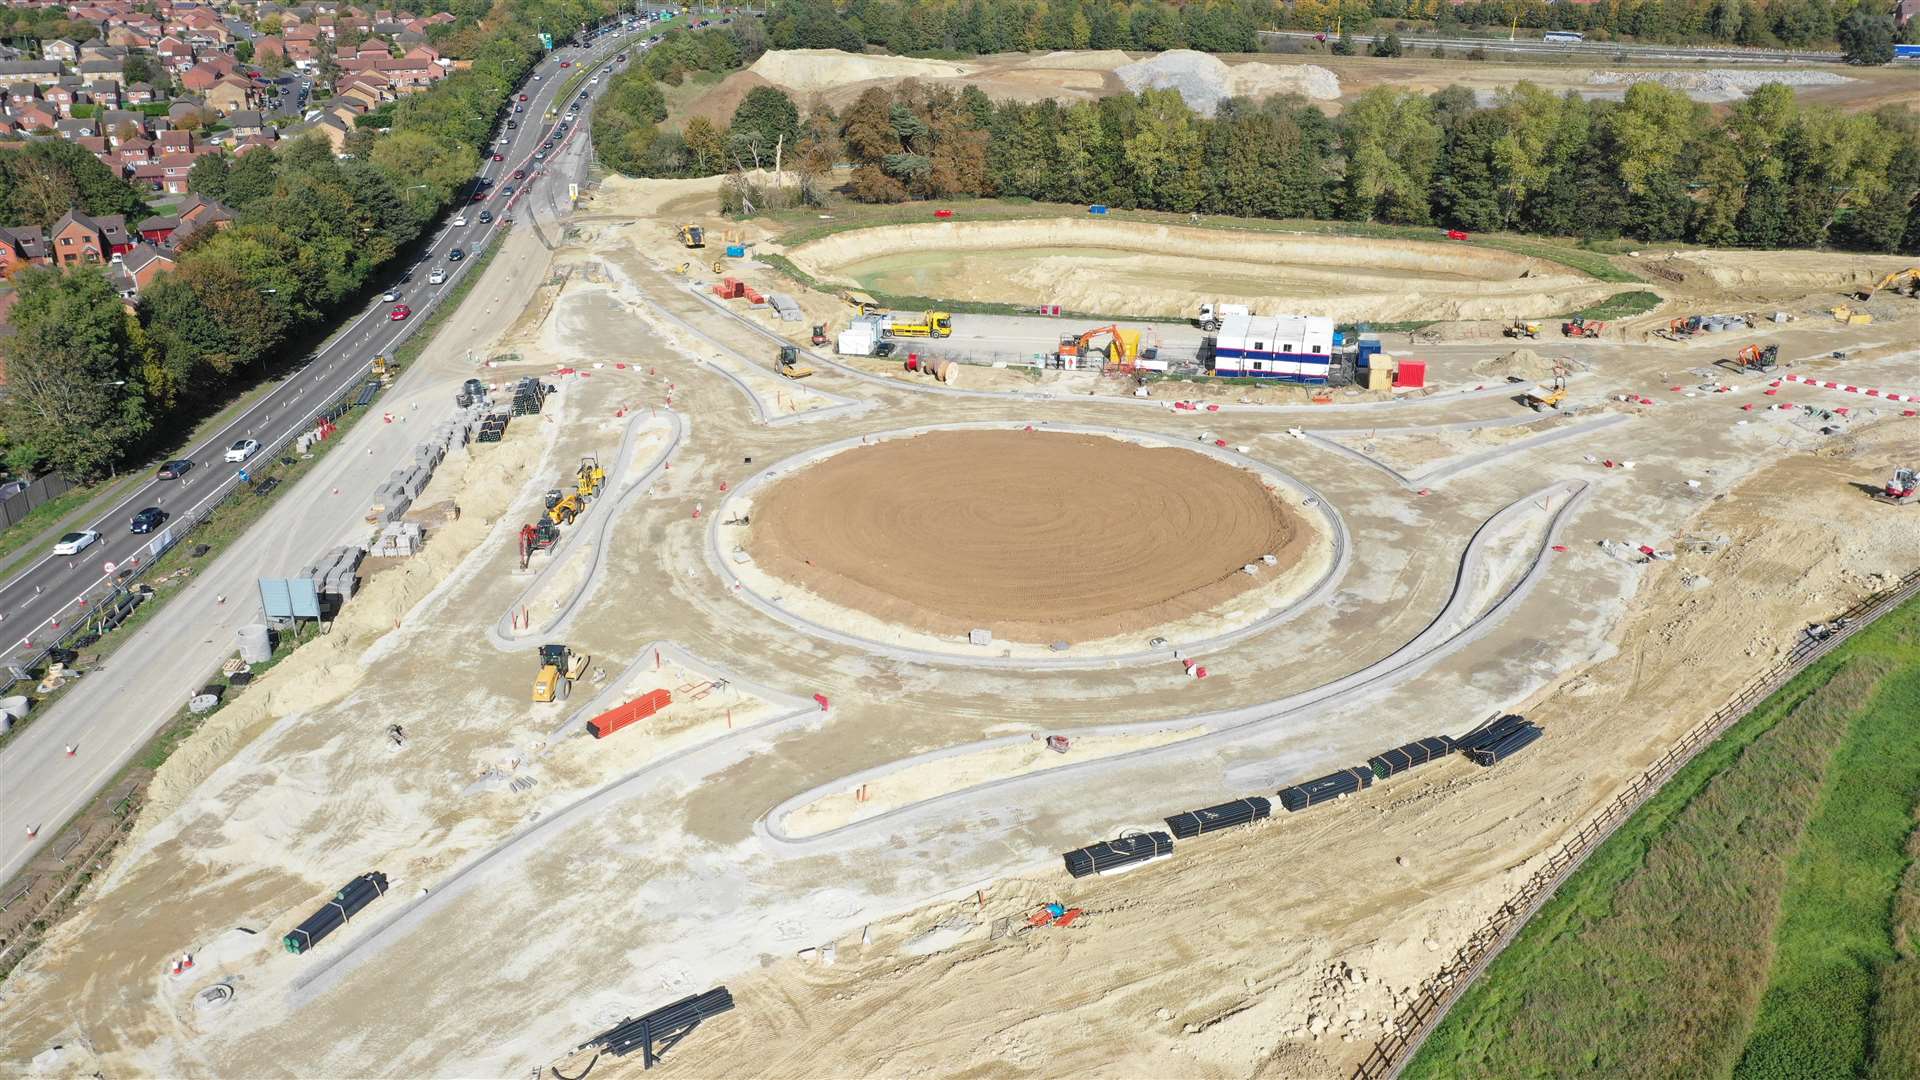 How the new roundabout looks. Picture: Vantage Photography / info@vantage-photography.co.uk